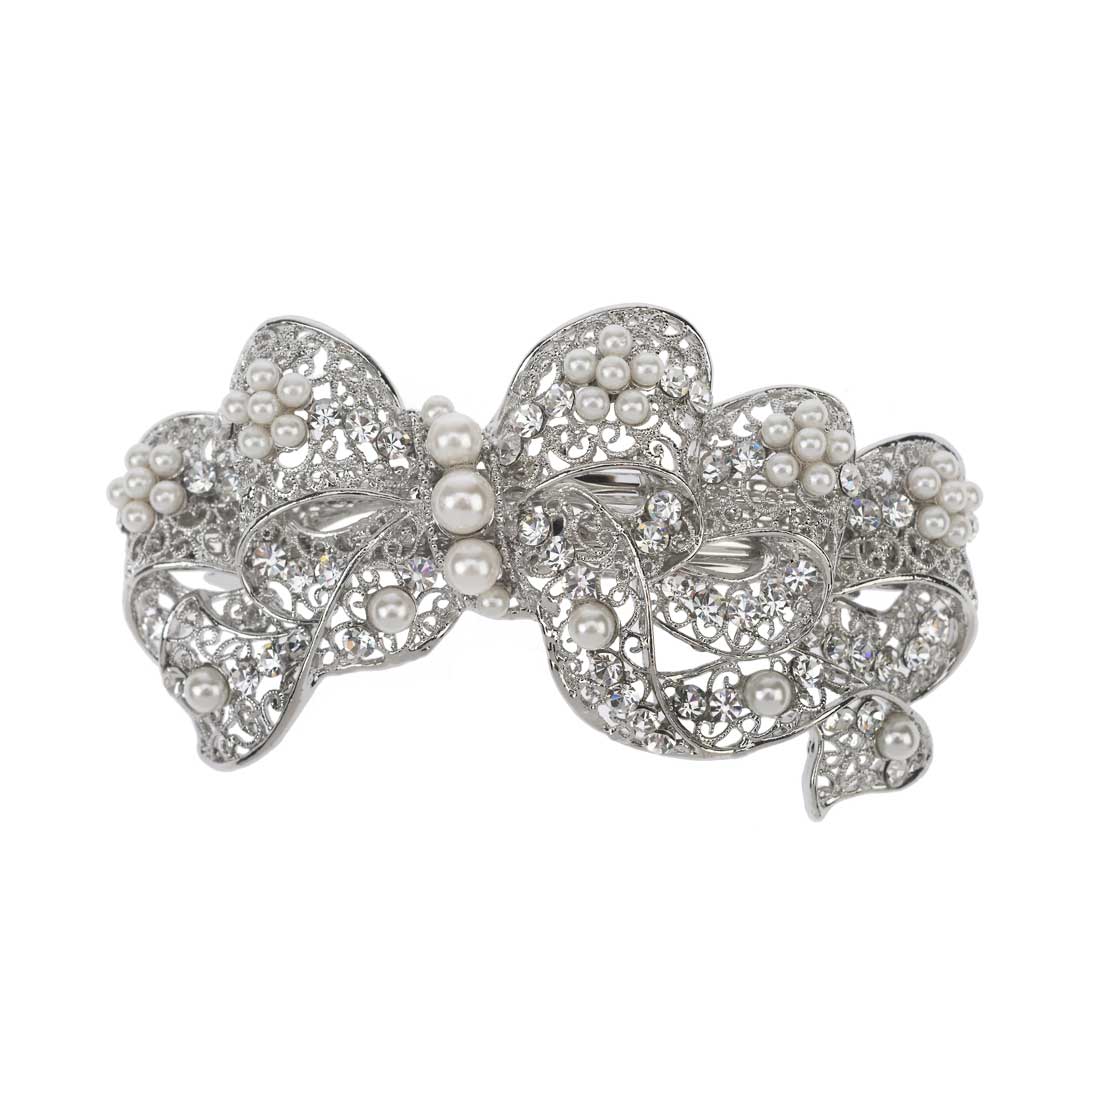 Bow of Pearls Vintage Wedding Hair Clip